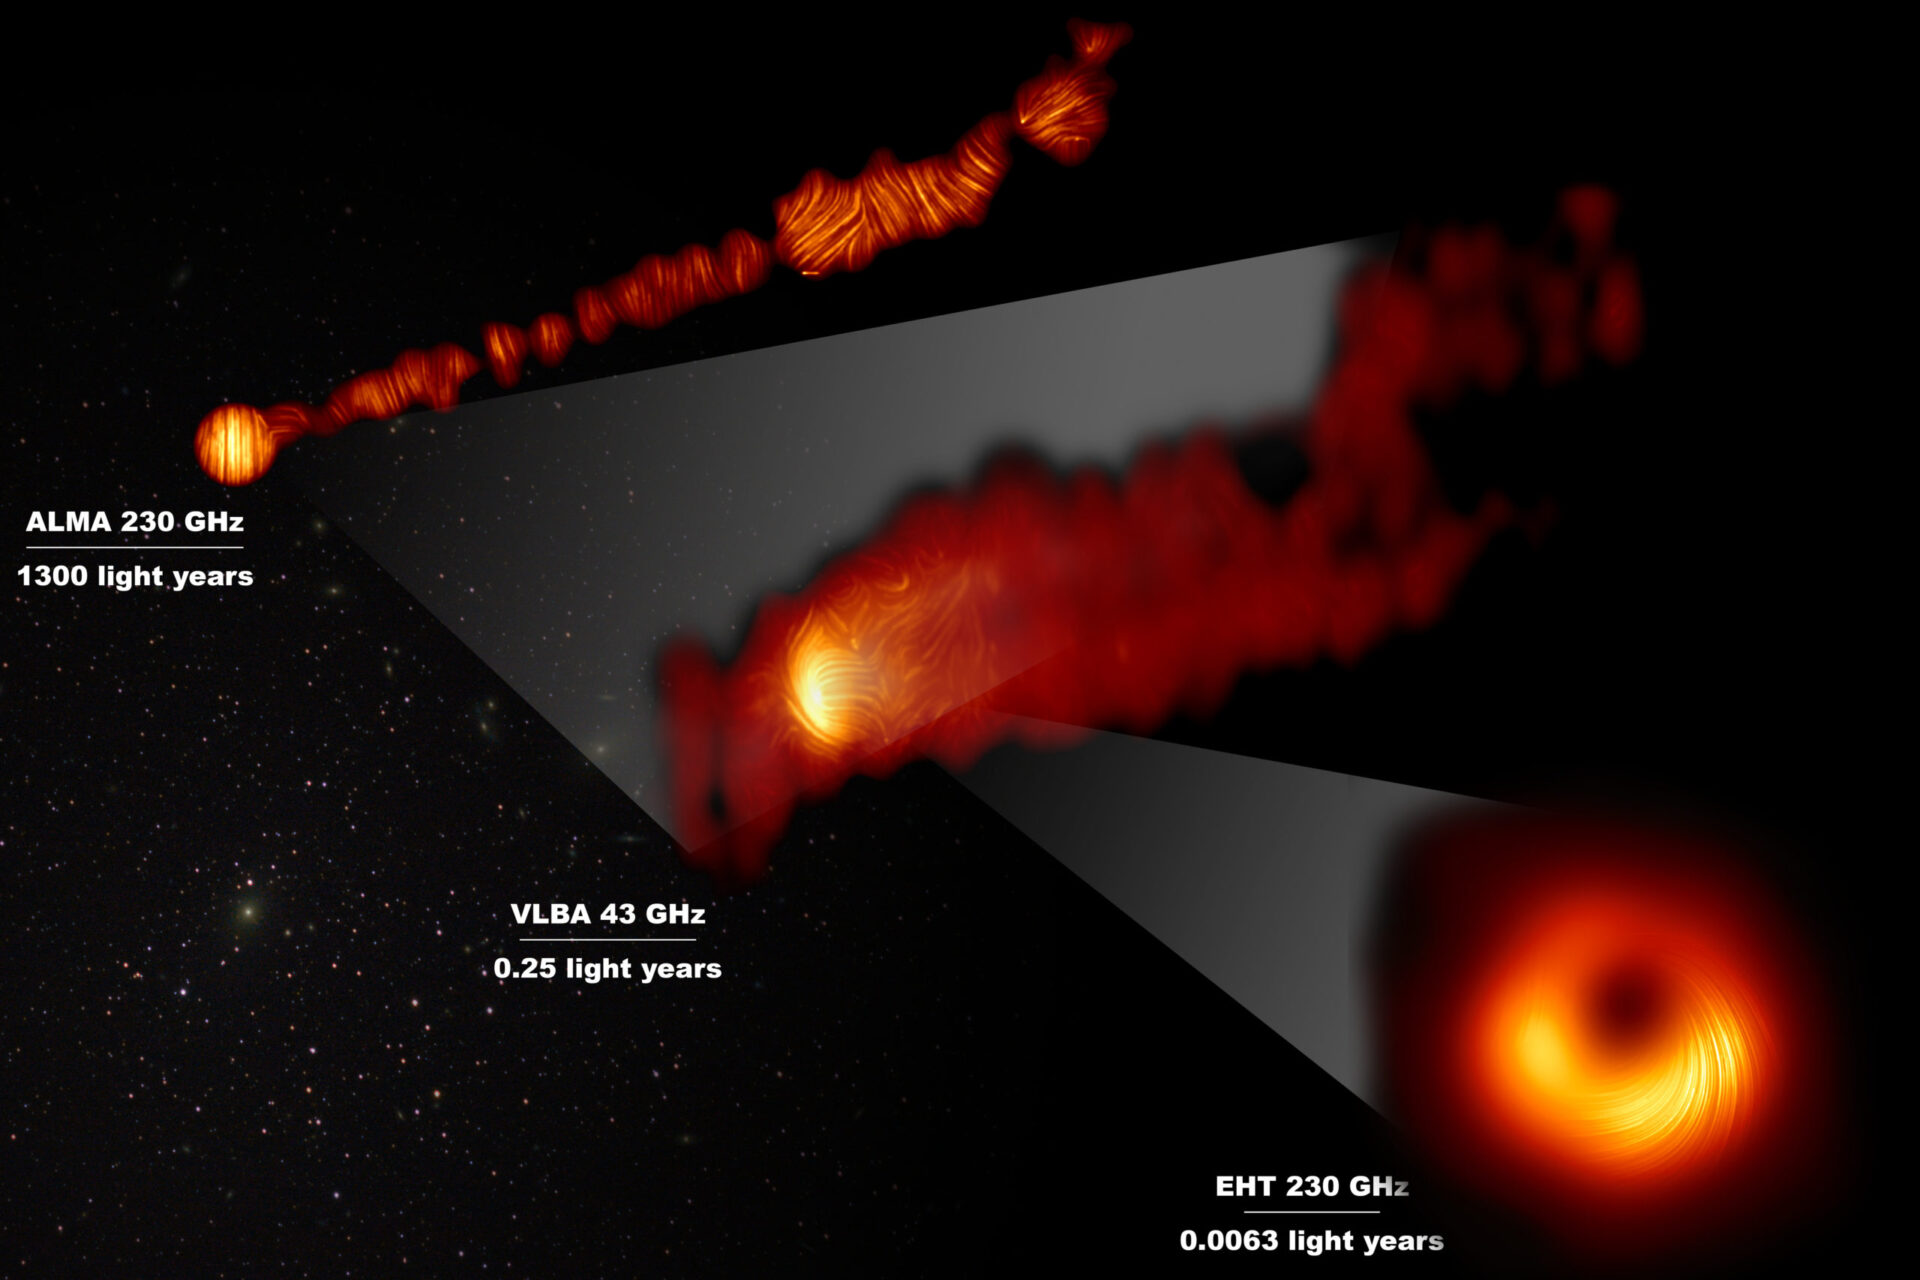 This composite image shows three views of the central region of the Messier 87 (M87) galaxy in polarised light. The galaxy has a supermassive black hole at its centre and is famous for its jets, that extend far beyond the galaxy. One of the polarised-light images, obtained with the Chile-based Atacama Large Millimeter/submillimeter Array (ALMA), in which ESO is a partner, shows part of the jet in polarised light. This image captures the part of the jet, with a size of 6000 light years, closer to the centre of the galaxy. The other polarised light images zoom in closer to the supermassive black hole: the middle view covers a region about one light year in size and was obtained with the National Radio Astronomy Observatory’s Very Long Baseline Array (VLBA) in the US. The most zoomed-in view was obtained by linking eight telescopes around the world to create a virtual Earth-sized telescope, the Event Horizon Telescope or EHT. This allows astronomers to see very close to the supermassive black hole, into the region where the jets are launched. The lines mark the orientation of polarisation, which is related to the magnetic field in the regions imaged.The ALMA data provides a description of the magnetic field structure along the jet. Therefore the combined information from the EHT and ALMA allows astronomers to investigate the role of magnetic fields from the vicinity of the event horizon (as probed with the EHT on light-day scales) to far beyond the M87 galaxy along its powerful jets (as probed with ALMA on scales of thousand of light-years). The values in GHz refer to the frequencies of light at which the different observations were made. The horizontal lines show the scale (in light years) of each of the individual images. Credit: EHT Collaboration; ALMA (ESO/NAOJ/NRAO), Goddi et al.; VLBA (NRAO), Kravchenko et al.; J. C. Algaba, I. Martí-Vidal